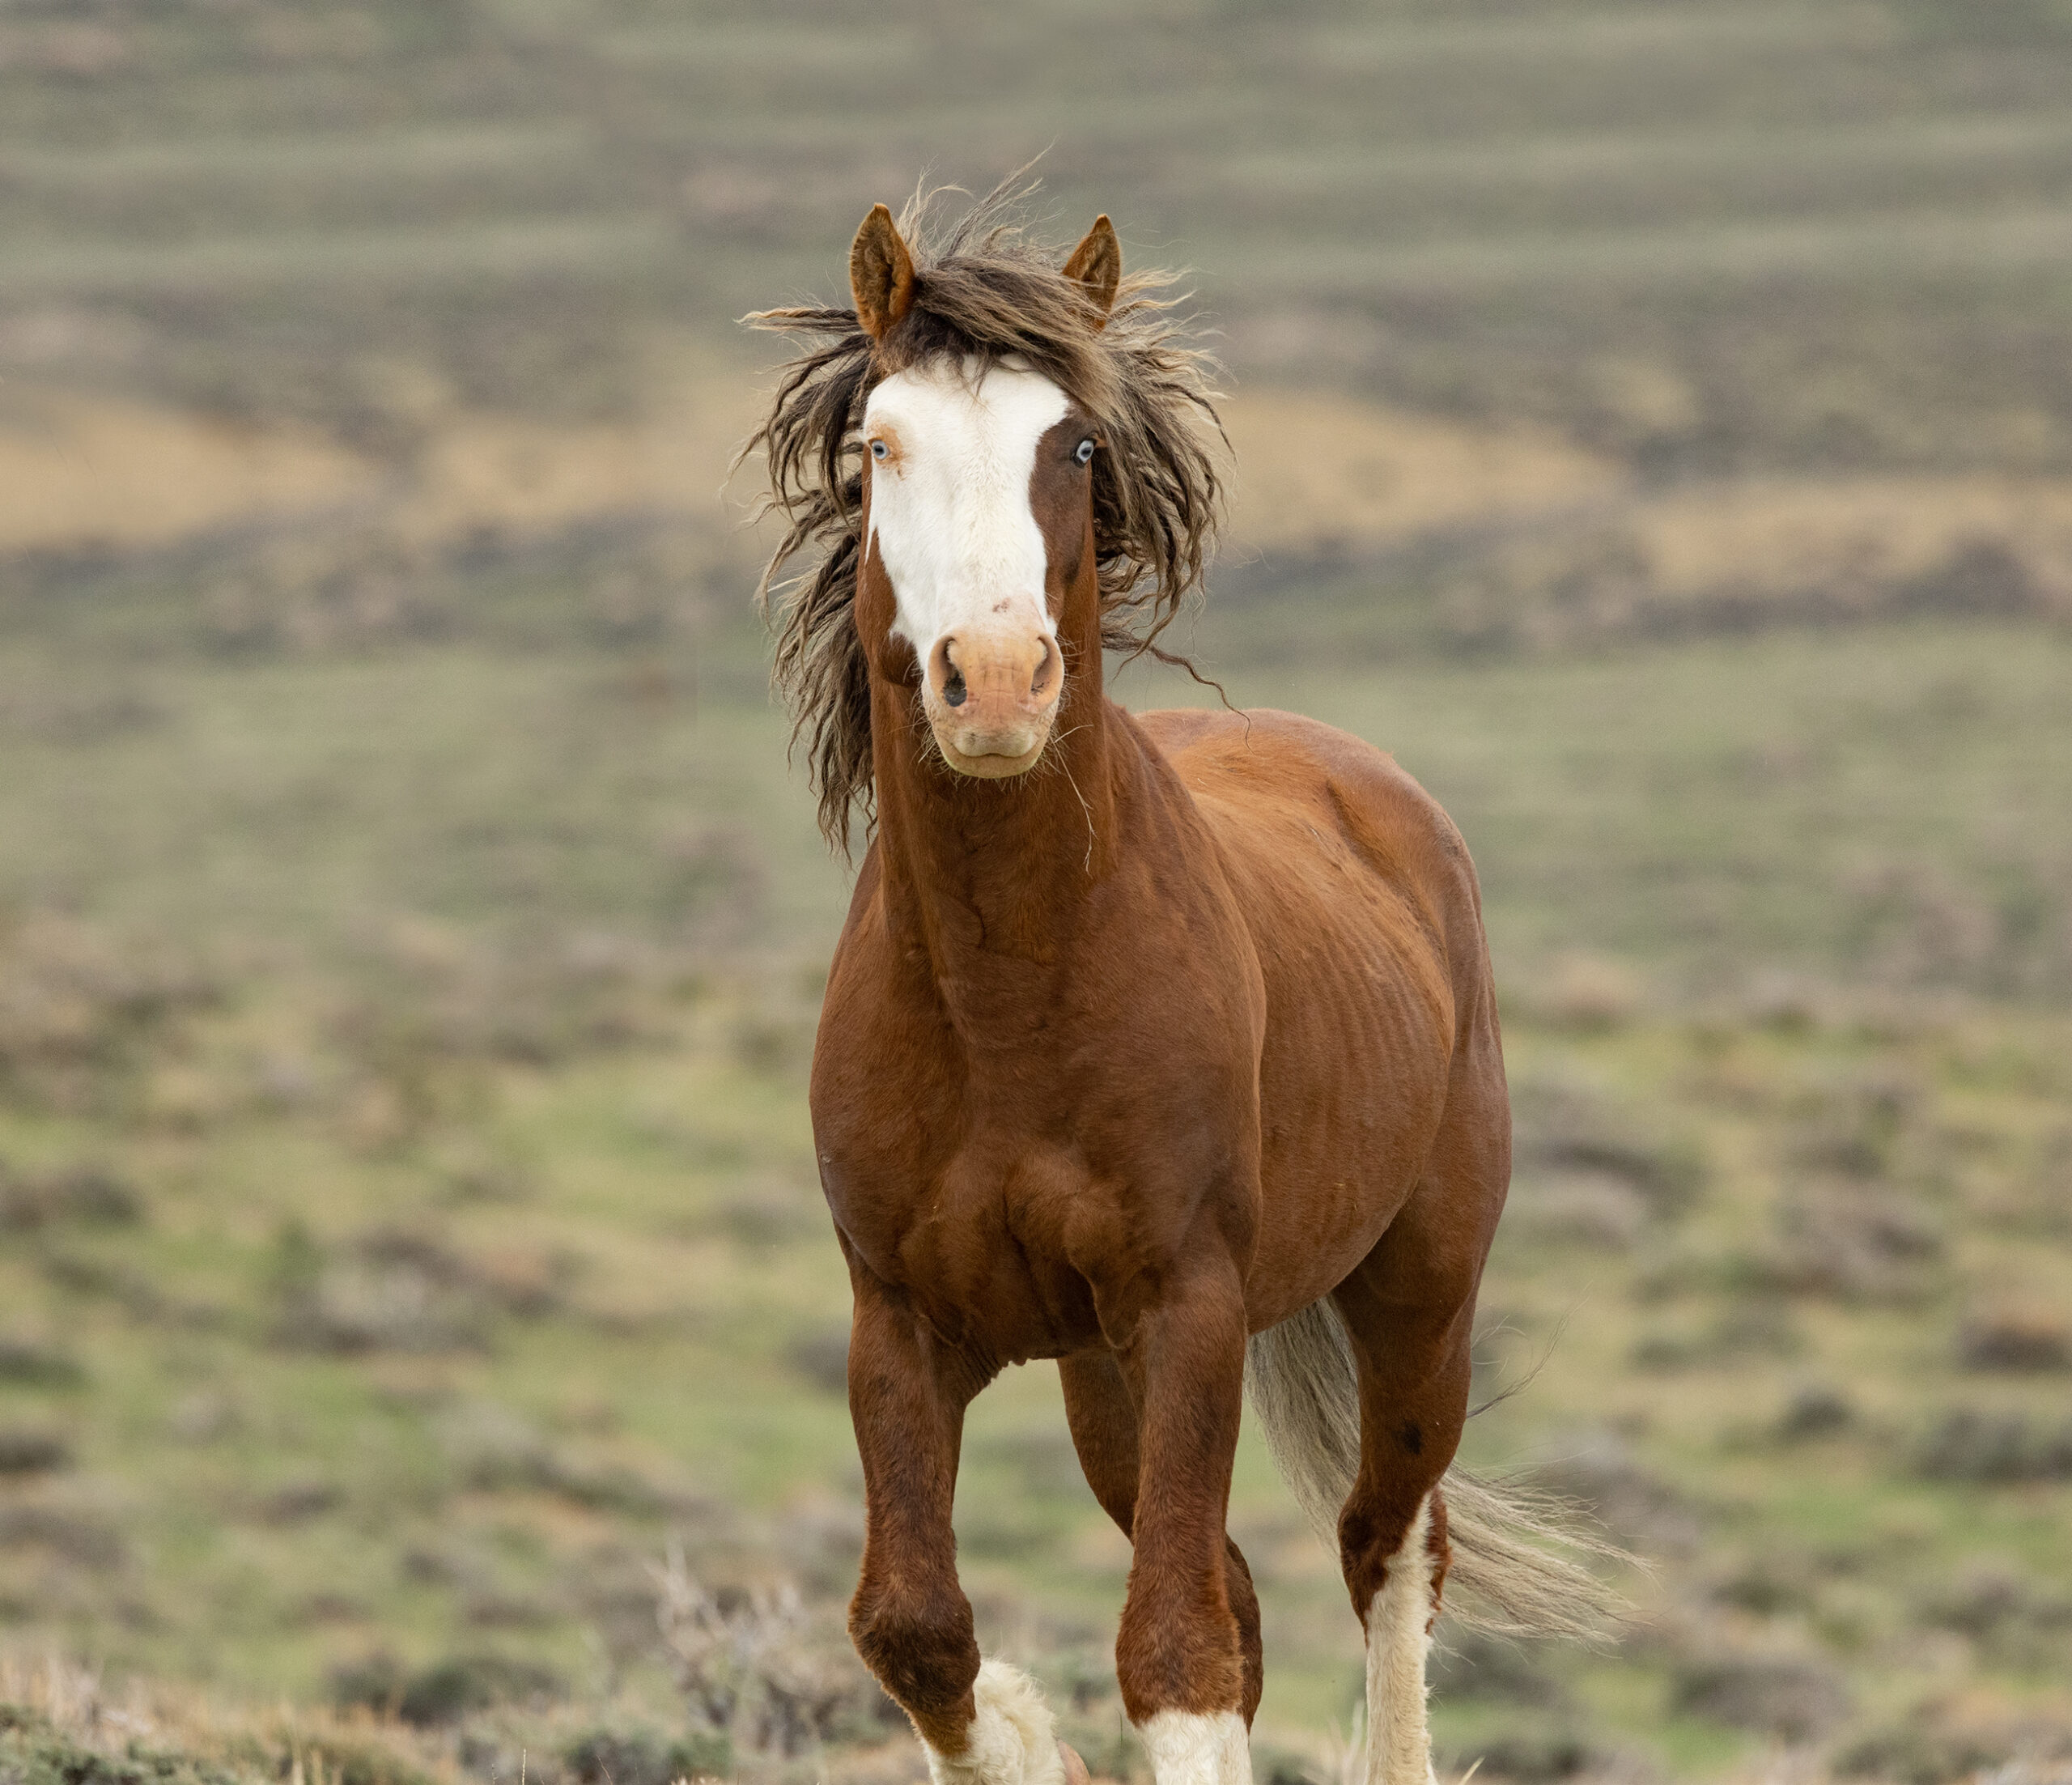 Freedom for Wild Horses with Carol J. Walker | AWHC WY Lawsuit: Interview with Suzanne Roy